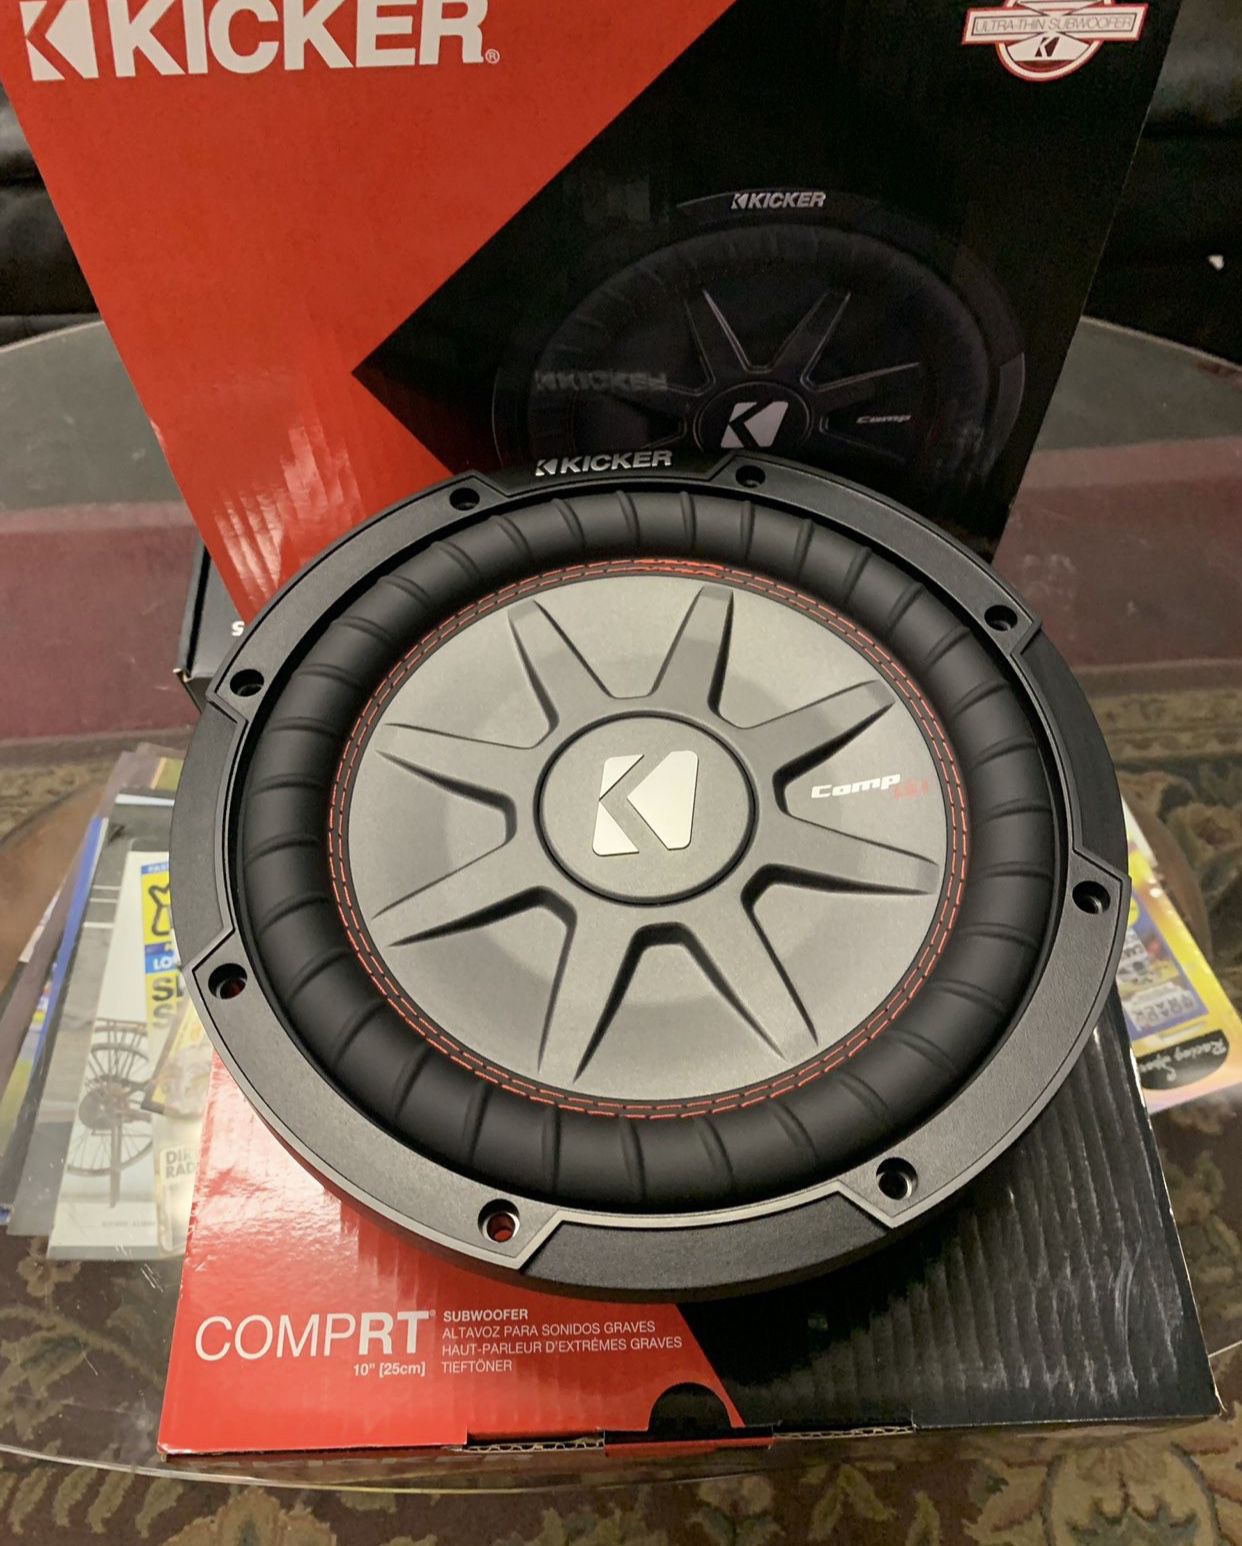 Kicker Car Audio 10 Inch Car Stereo Subwoofer . Thin Mount Comp R . Holiday Super Sale . $129 While They Last . New